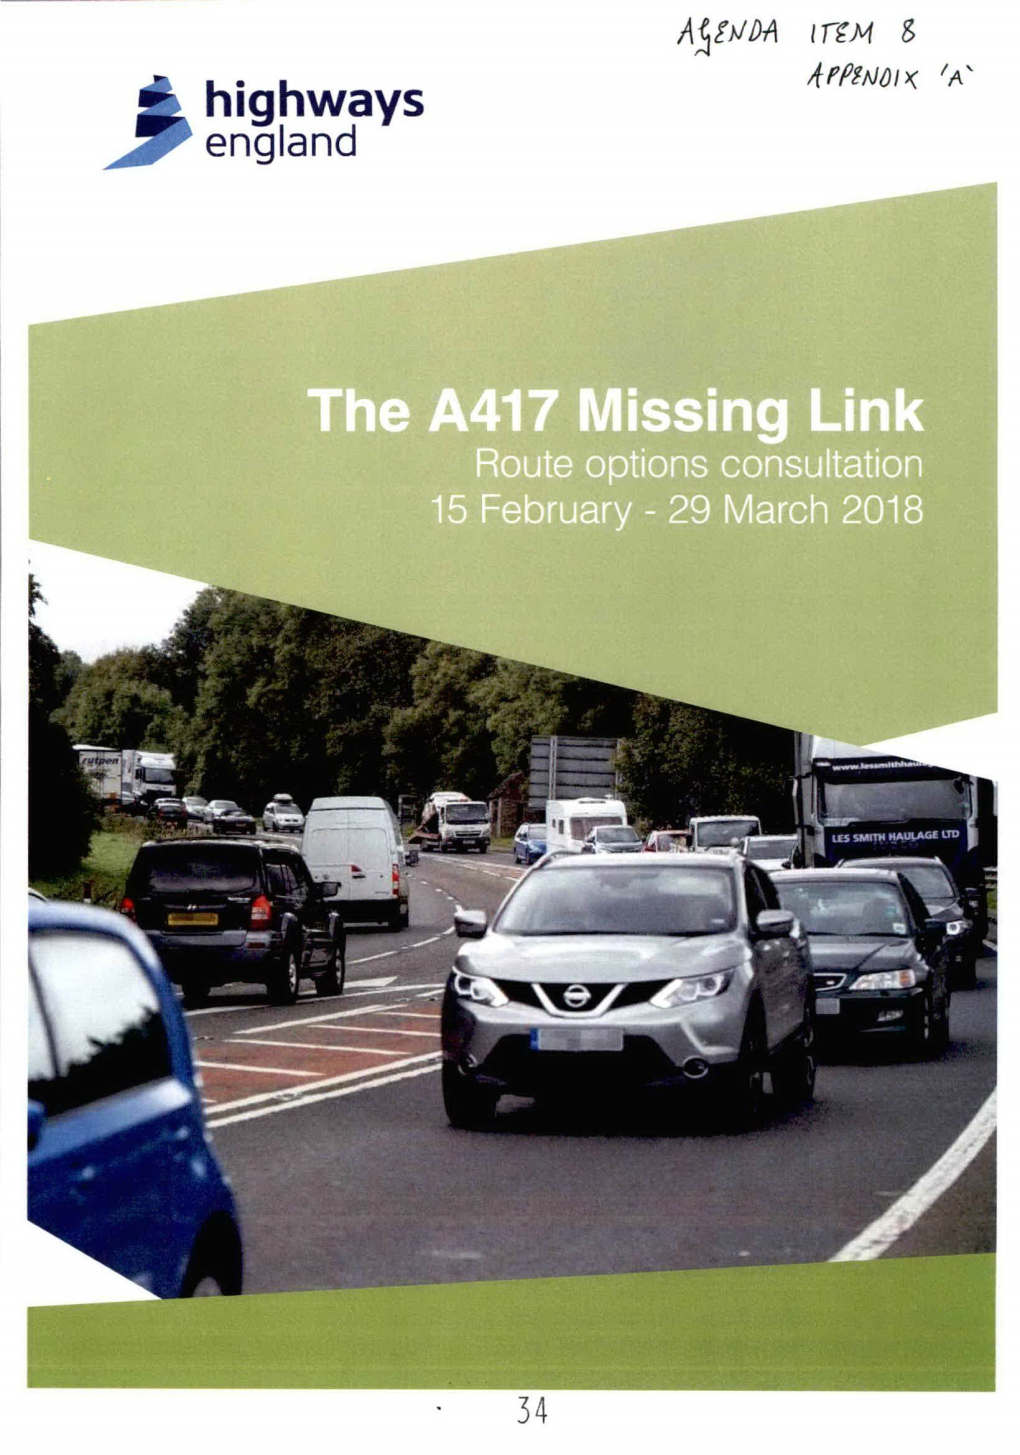 The A417 Missing Link Route Options Consultation 15 February - 29 March 2018